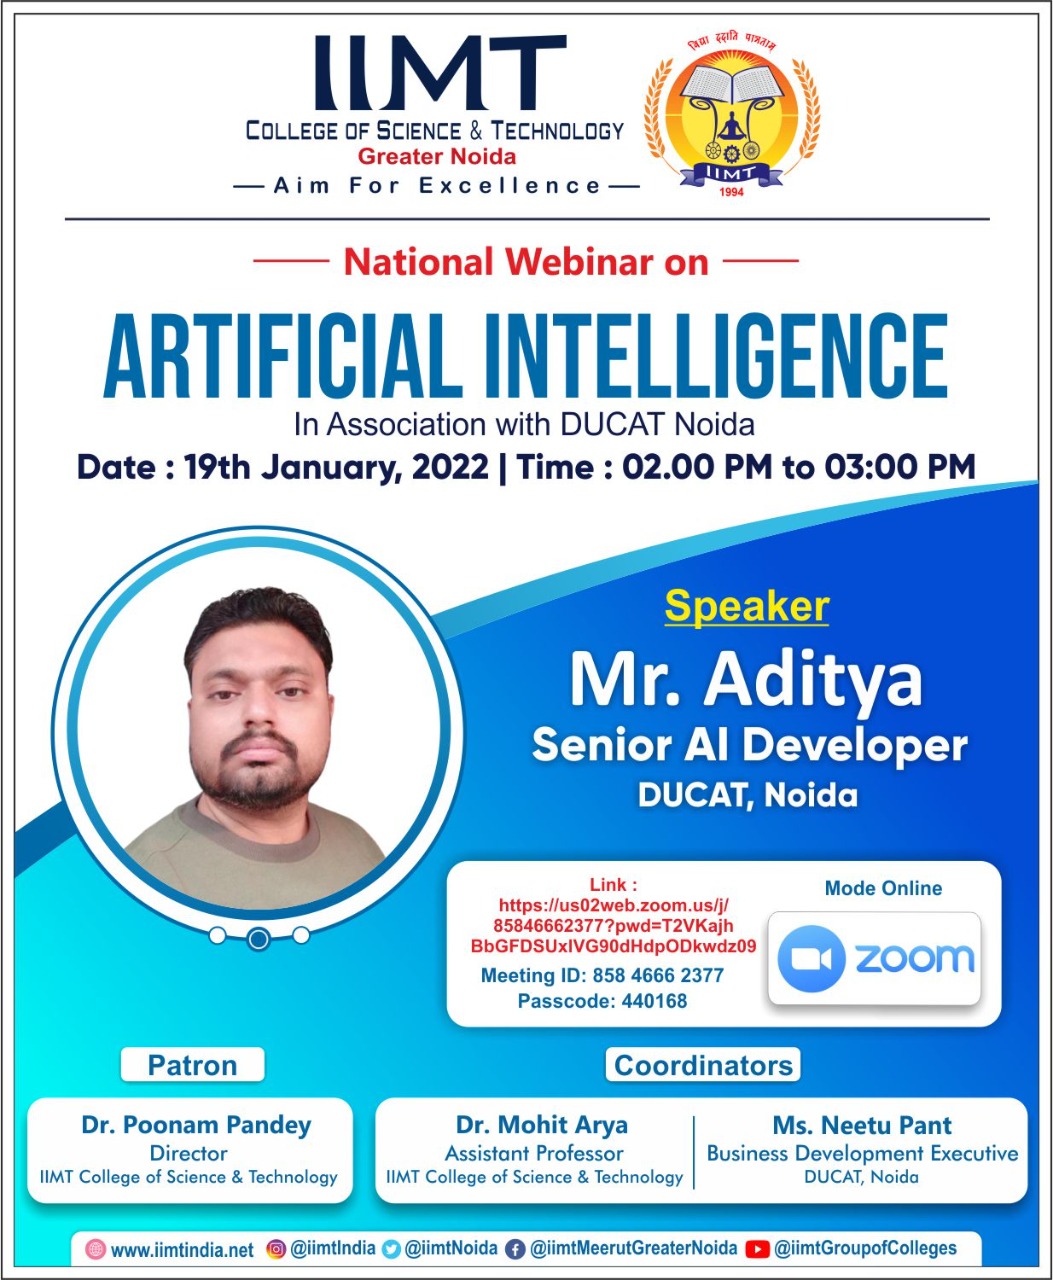 National Webinar on ARTIFICIAL INTELLIGENCE in Association with DUCAT Noida on 19th January 2022 